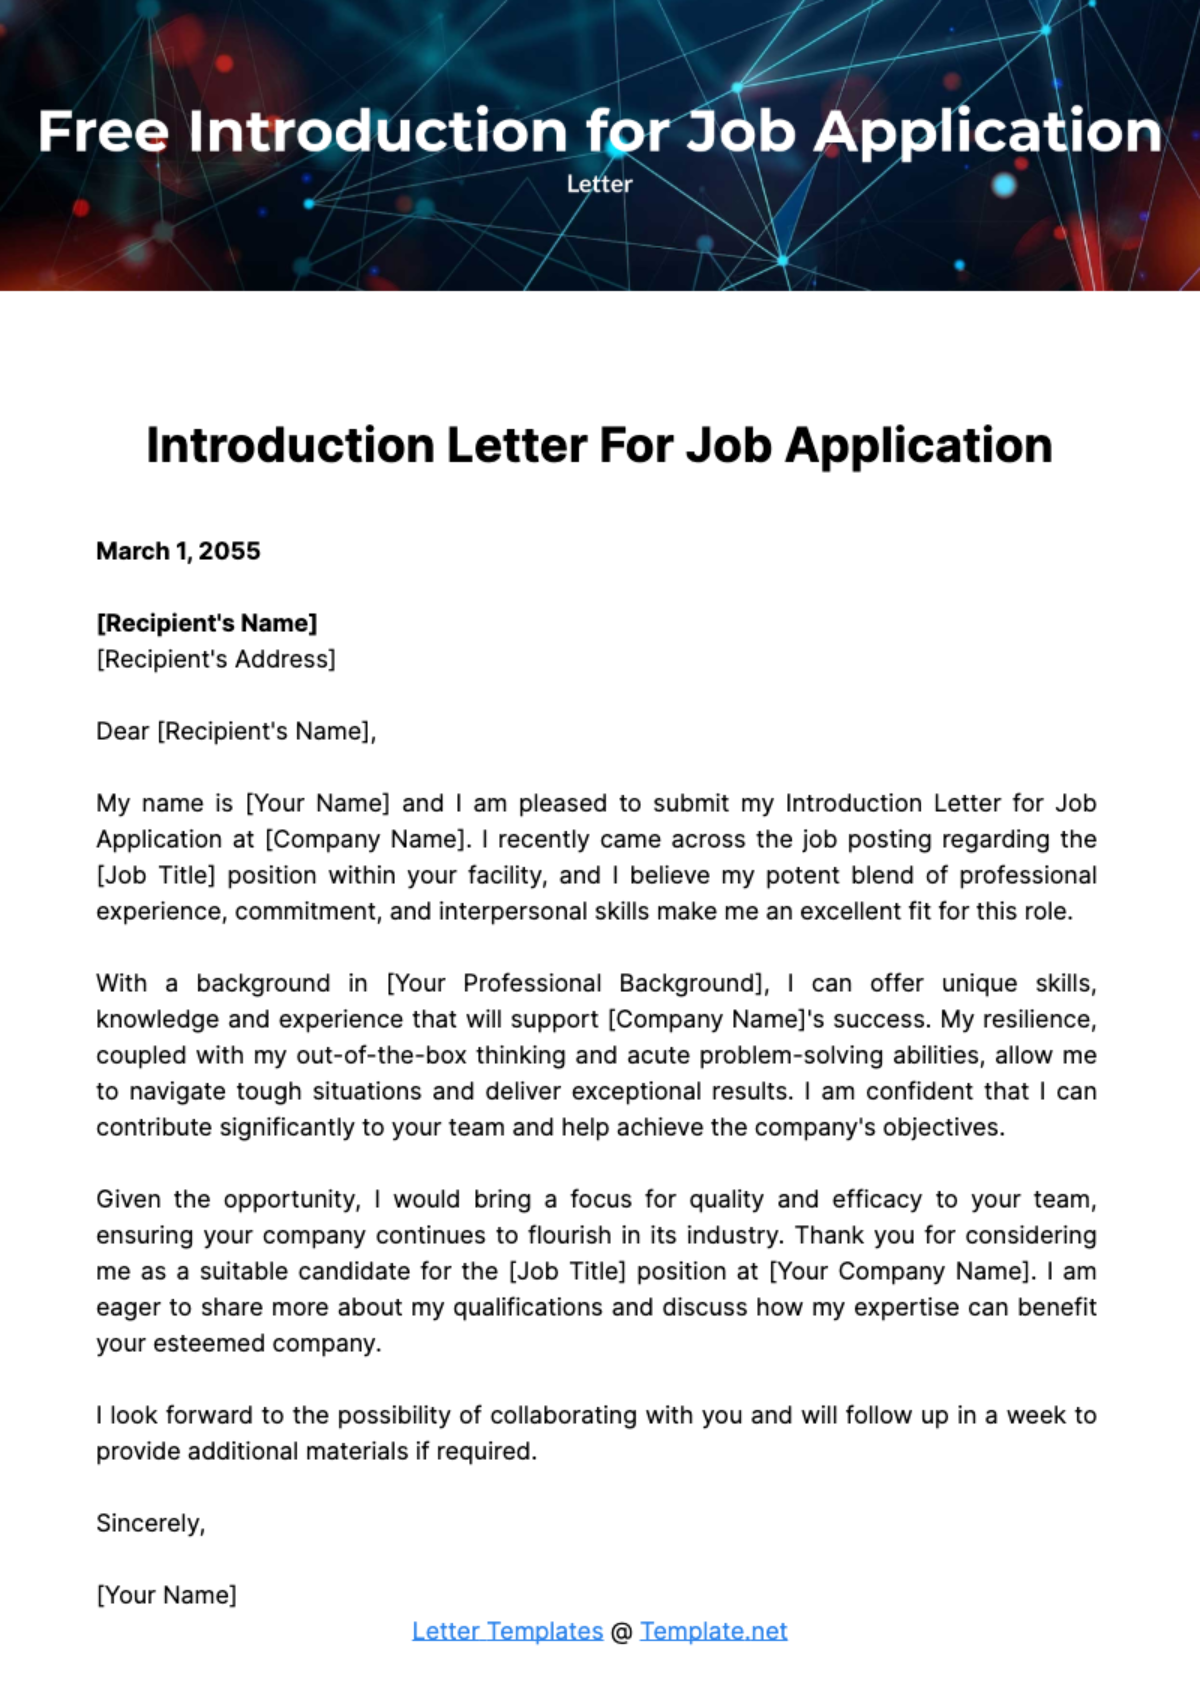 Free Introduction Letter for Job Application Template